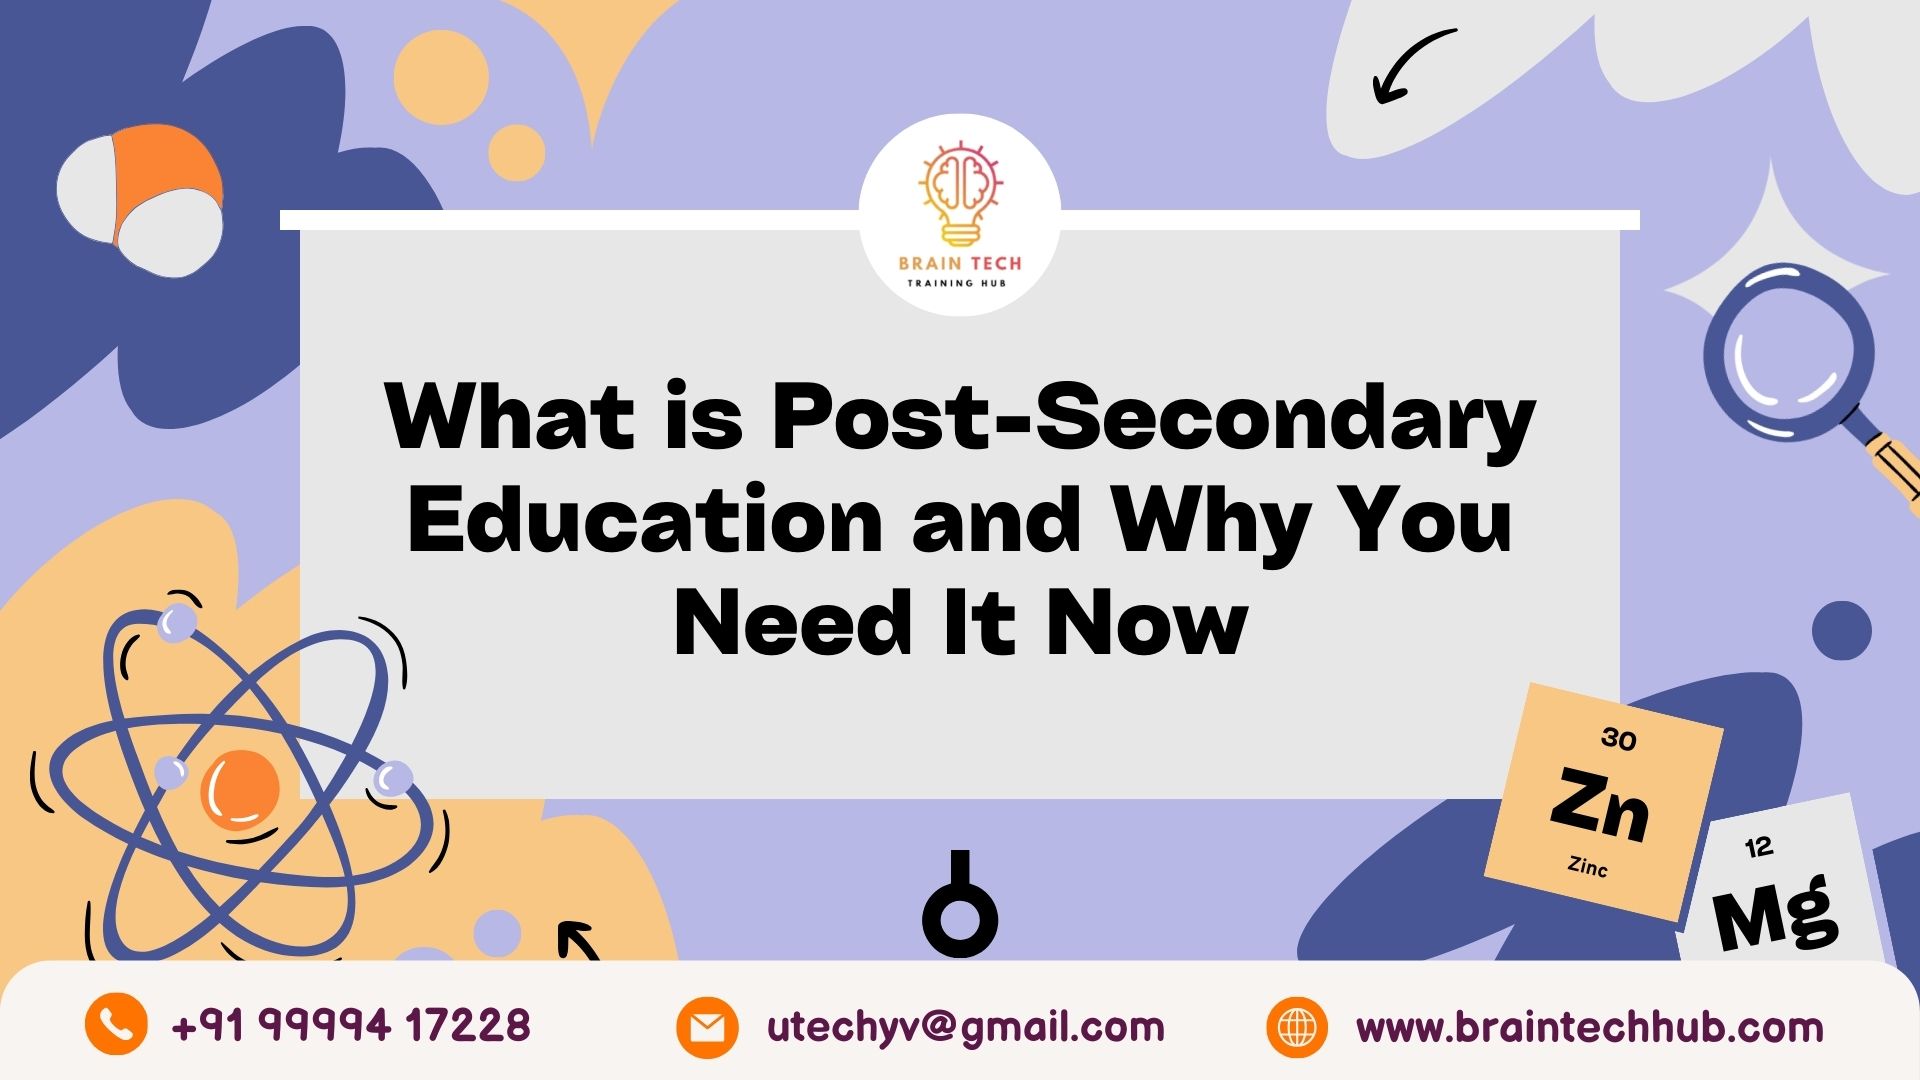 What is Post-Secondary Education and Why You Need It Now